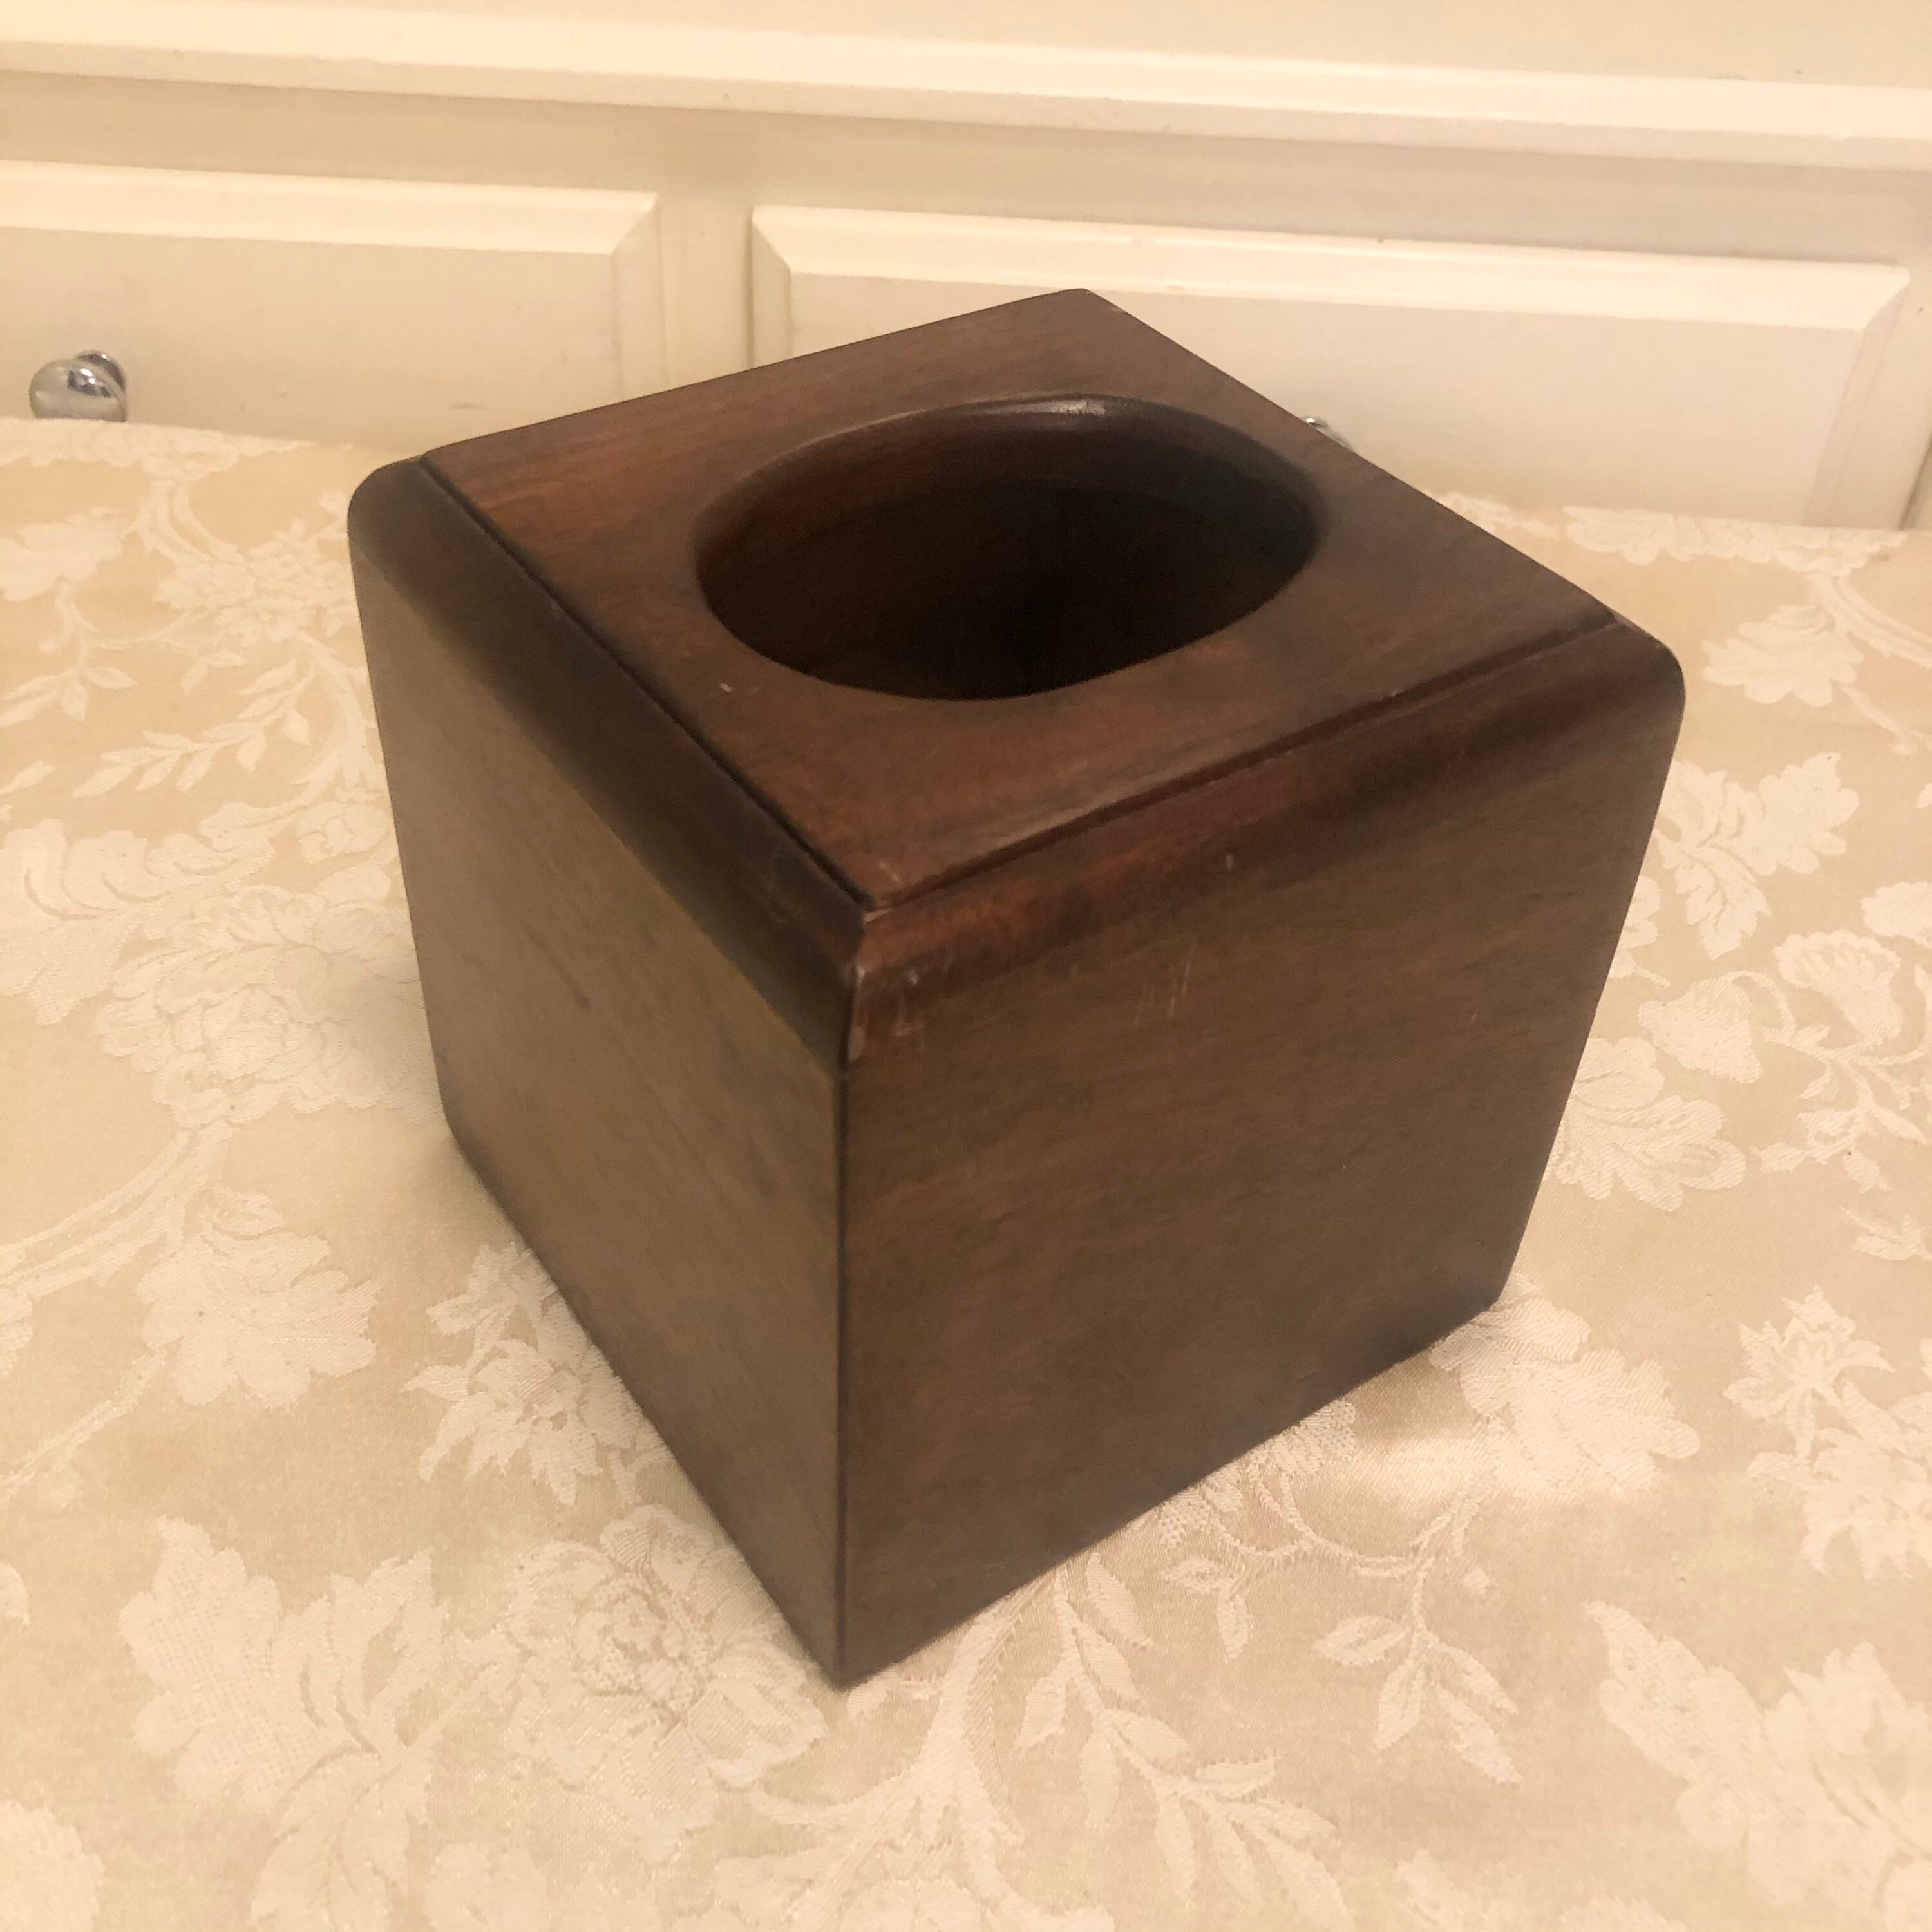 Unfinished Wood Tissue Box Cover for DIY Custom Design, Square